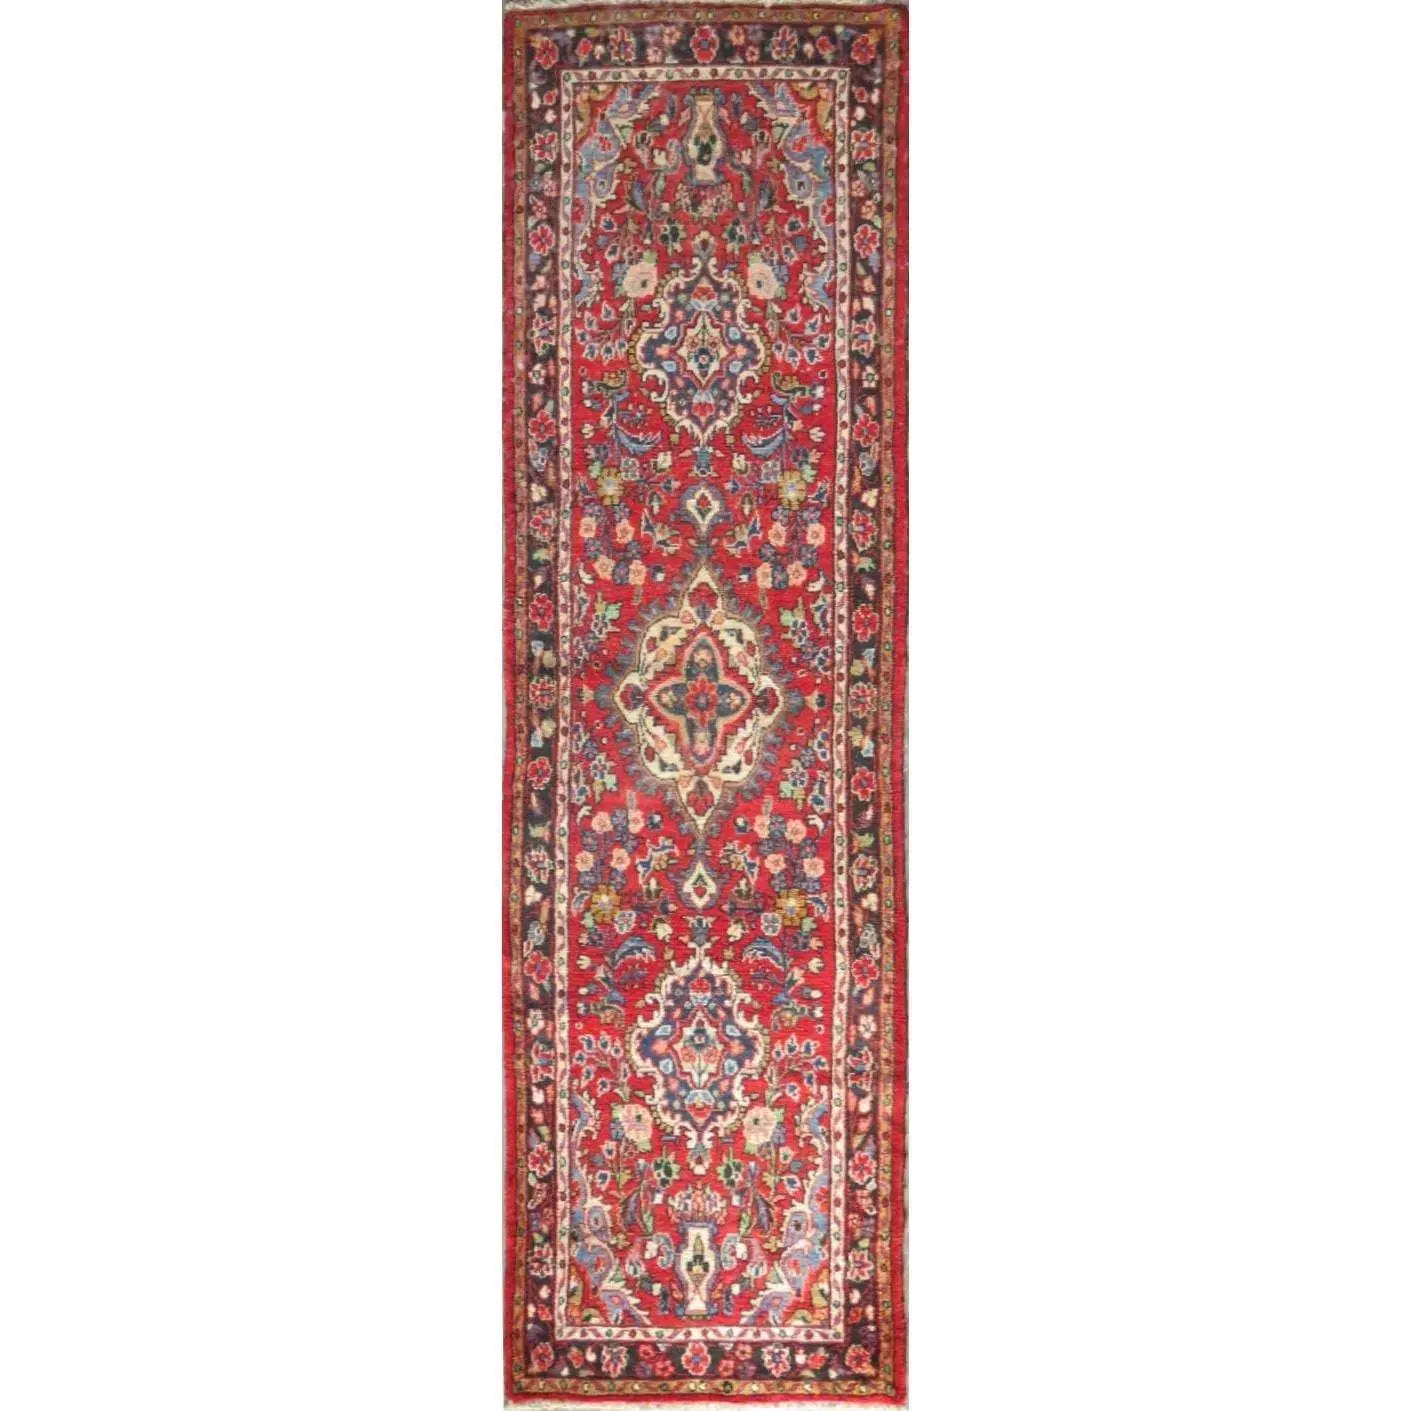 Hand-Knotted Persian Wool Rug _ Luxurious Vintage Design, 10'7" x 2'10, Artisan Crafted